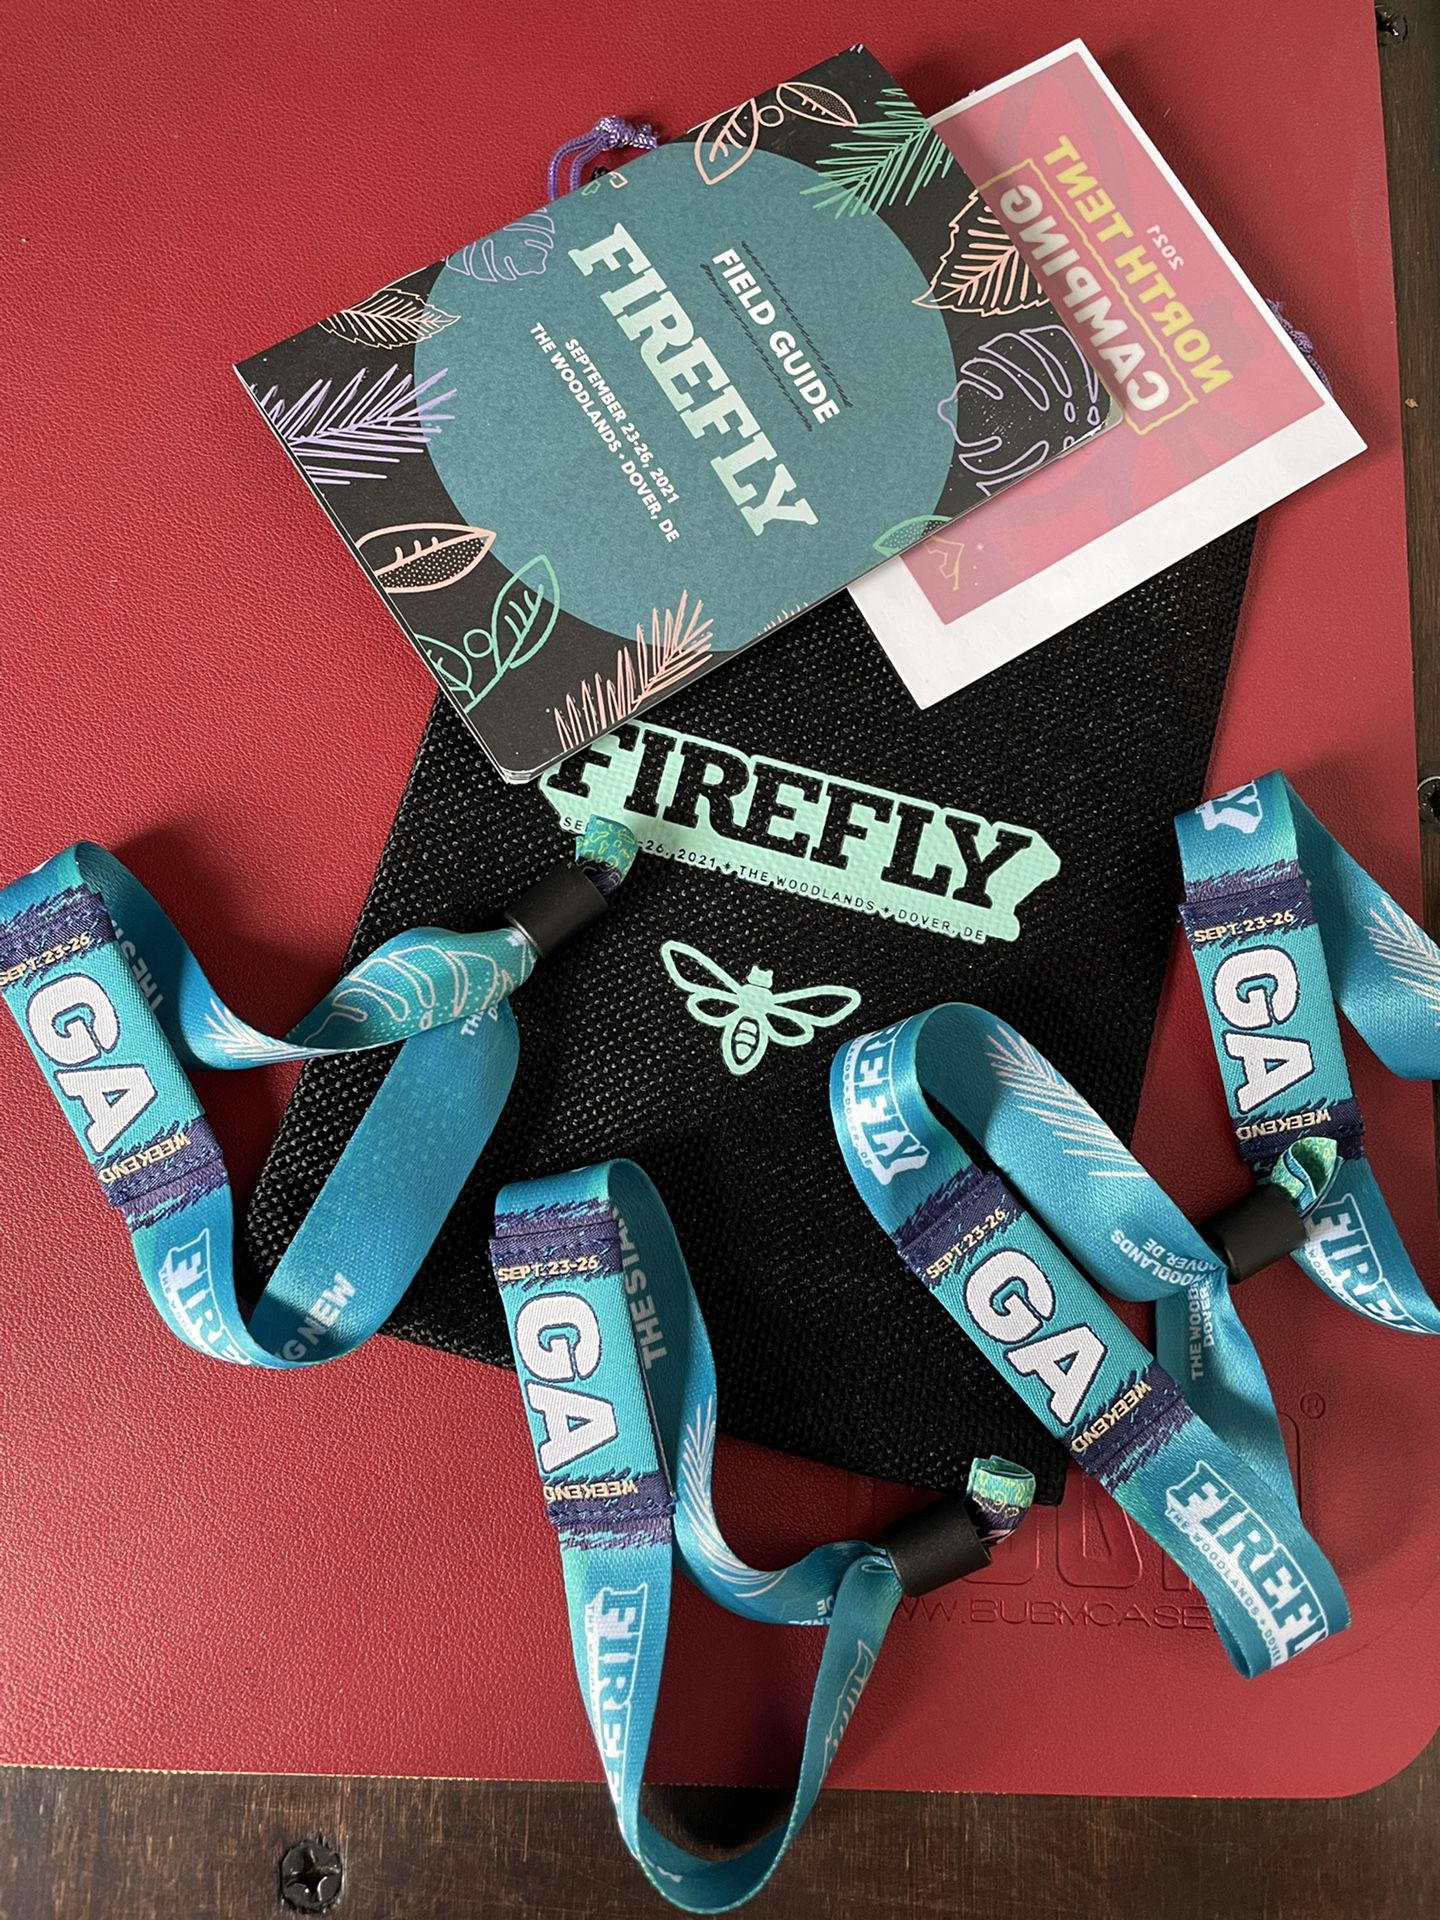 Firefly Music Festival Tickets - GA Full Weekend Passes (4 Available)